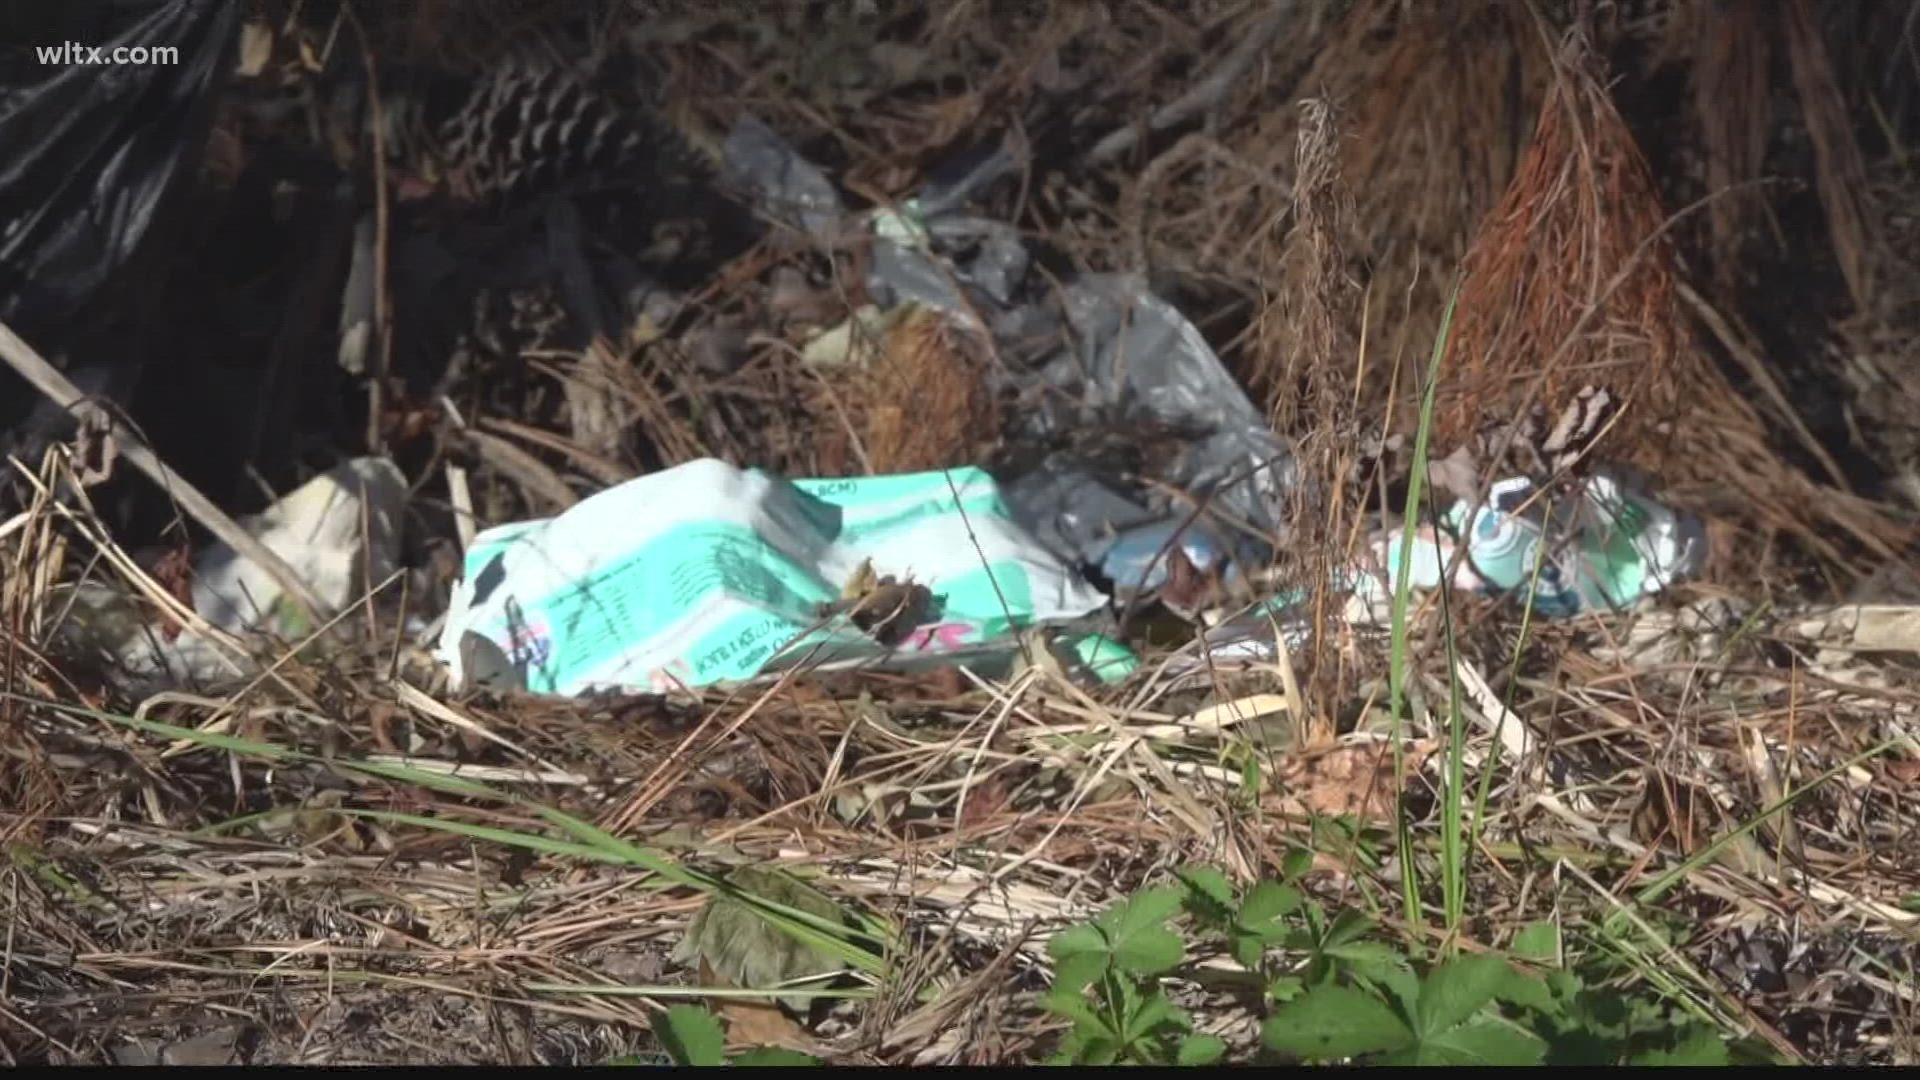 Some residents living near the Sumter County landfill say they've been dealing with illegal dumping on their property for years.